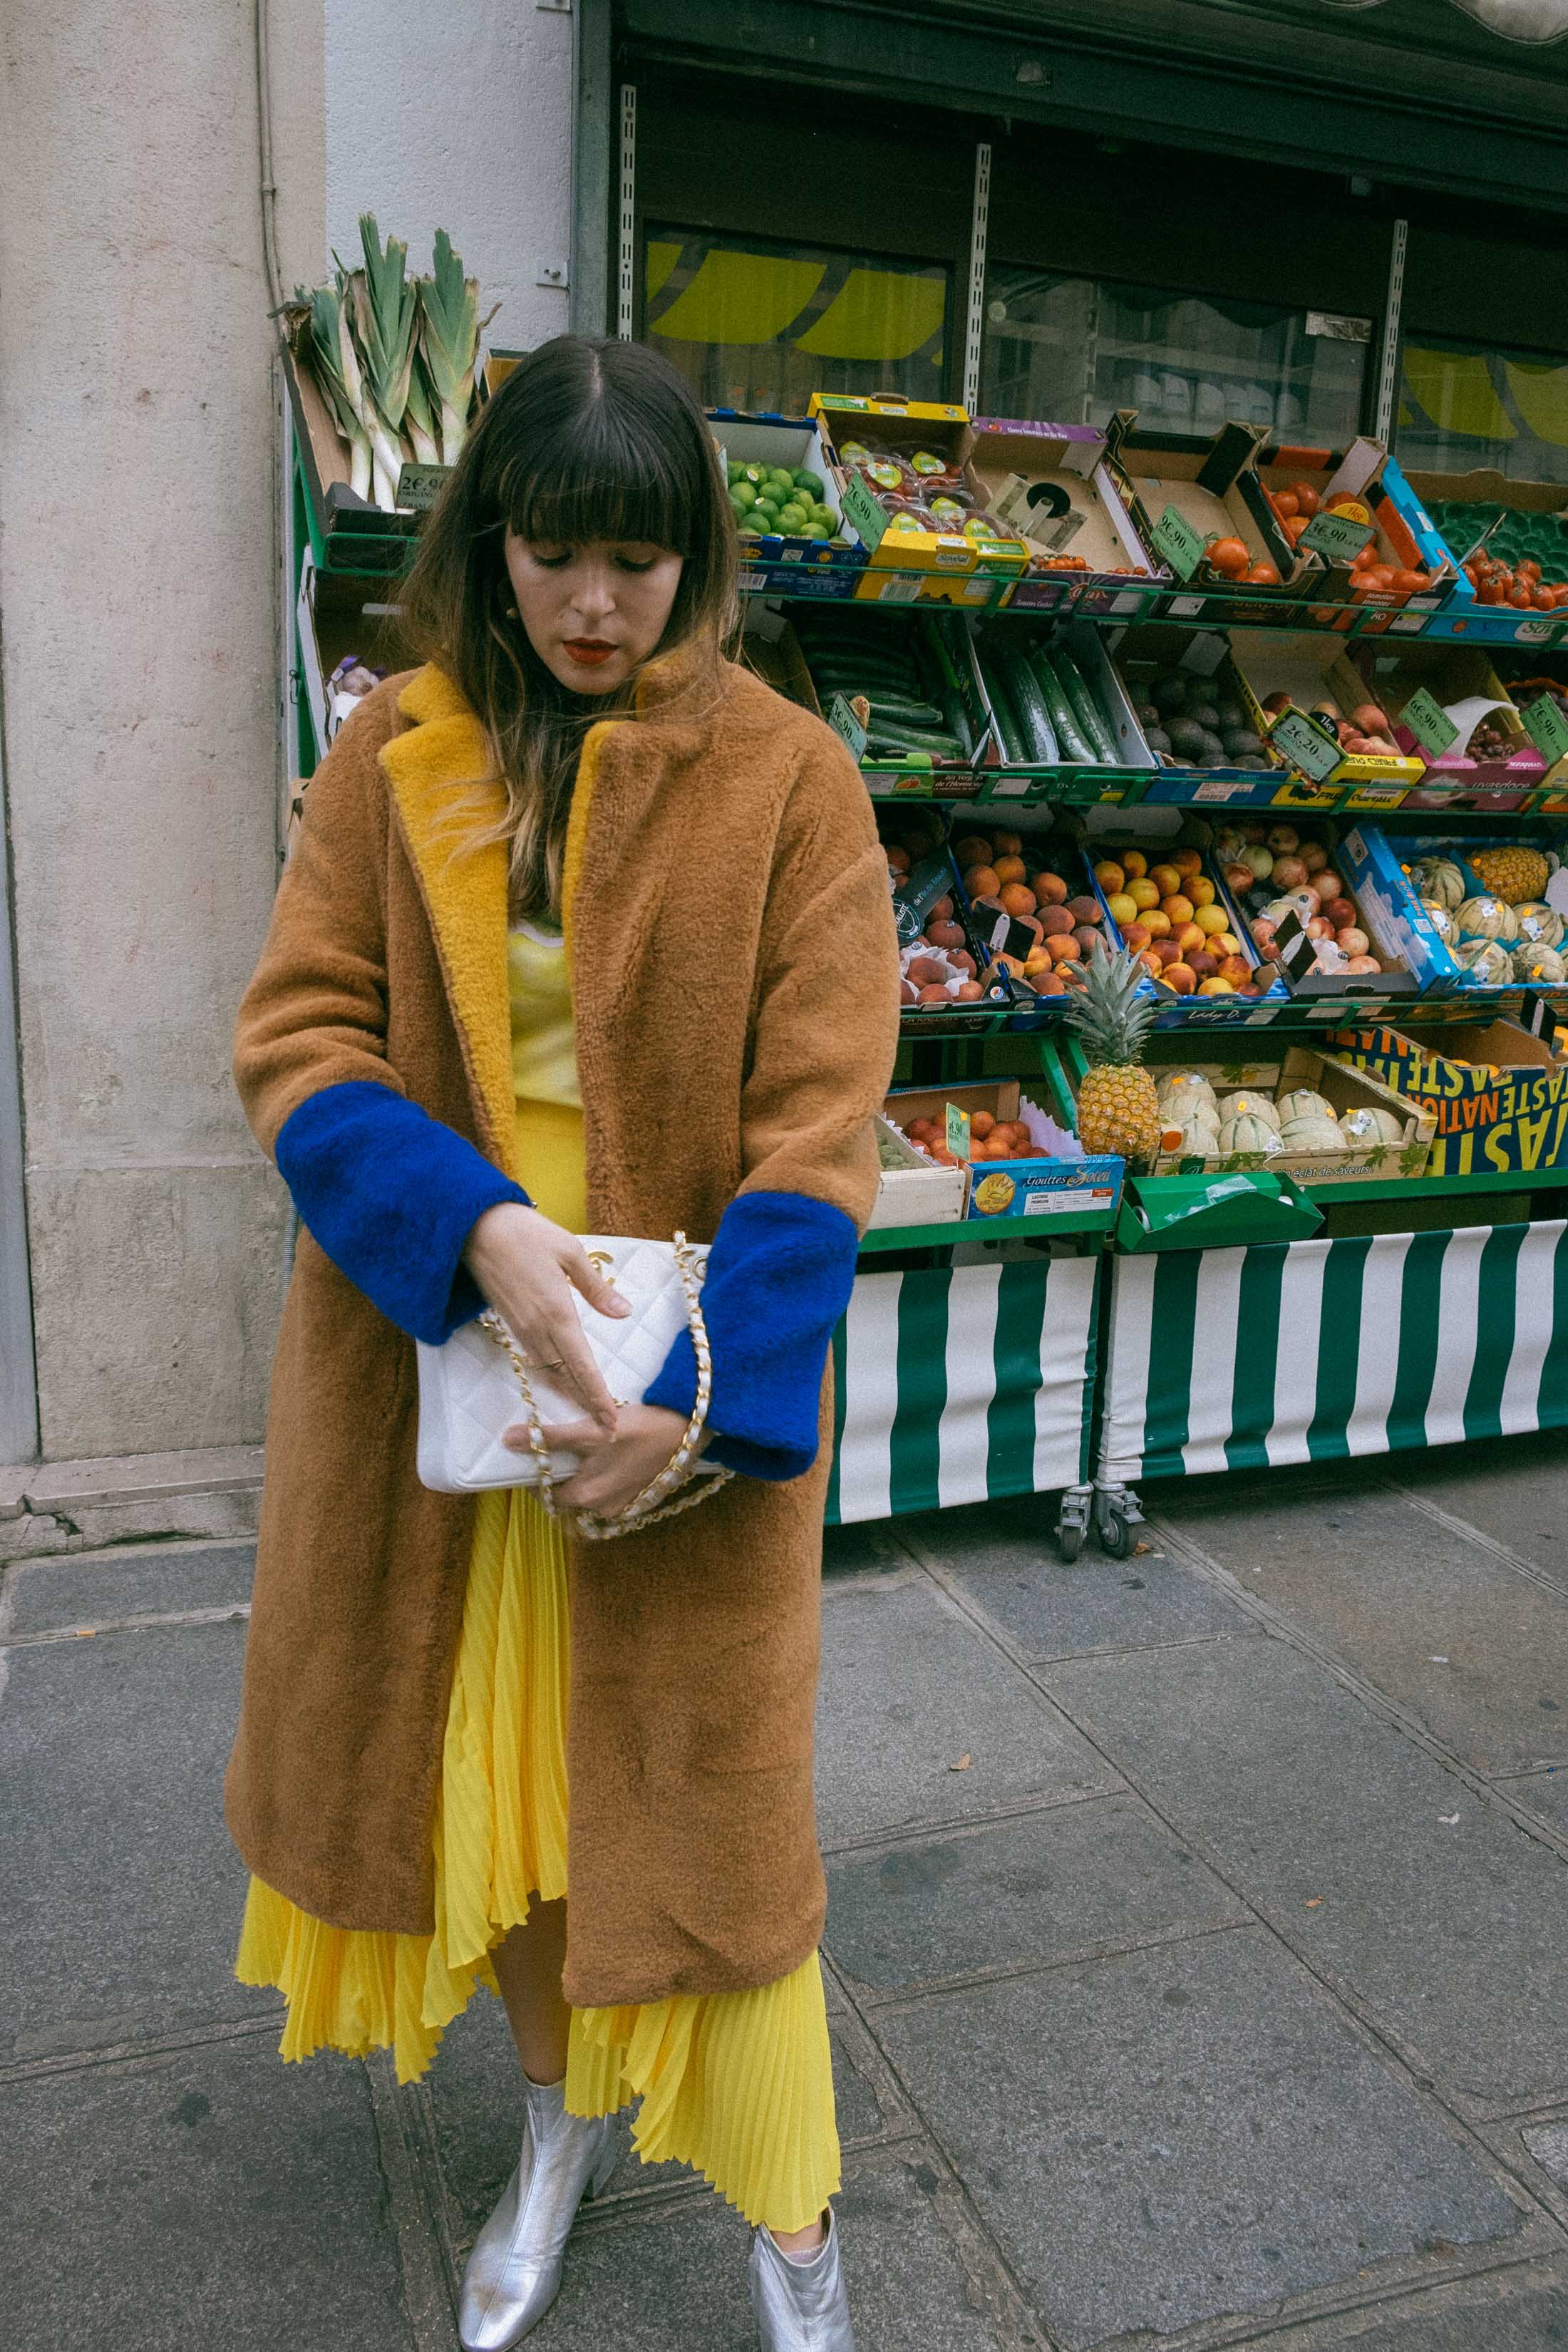 Maristella wears a brown teddy coat with contrast blue sleeves and yellow collar from Mango, white Chanel vintage bag, Loeffler Randall silver boots, yellow pleated skirt and Ganni lemon t-shirt